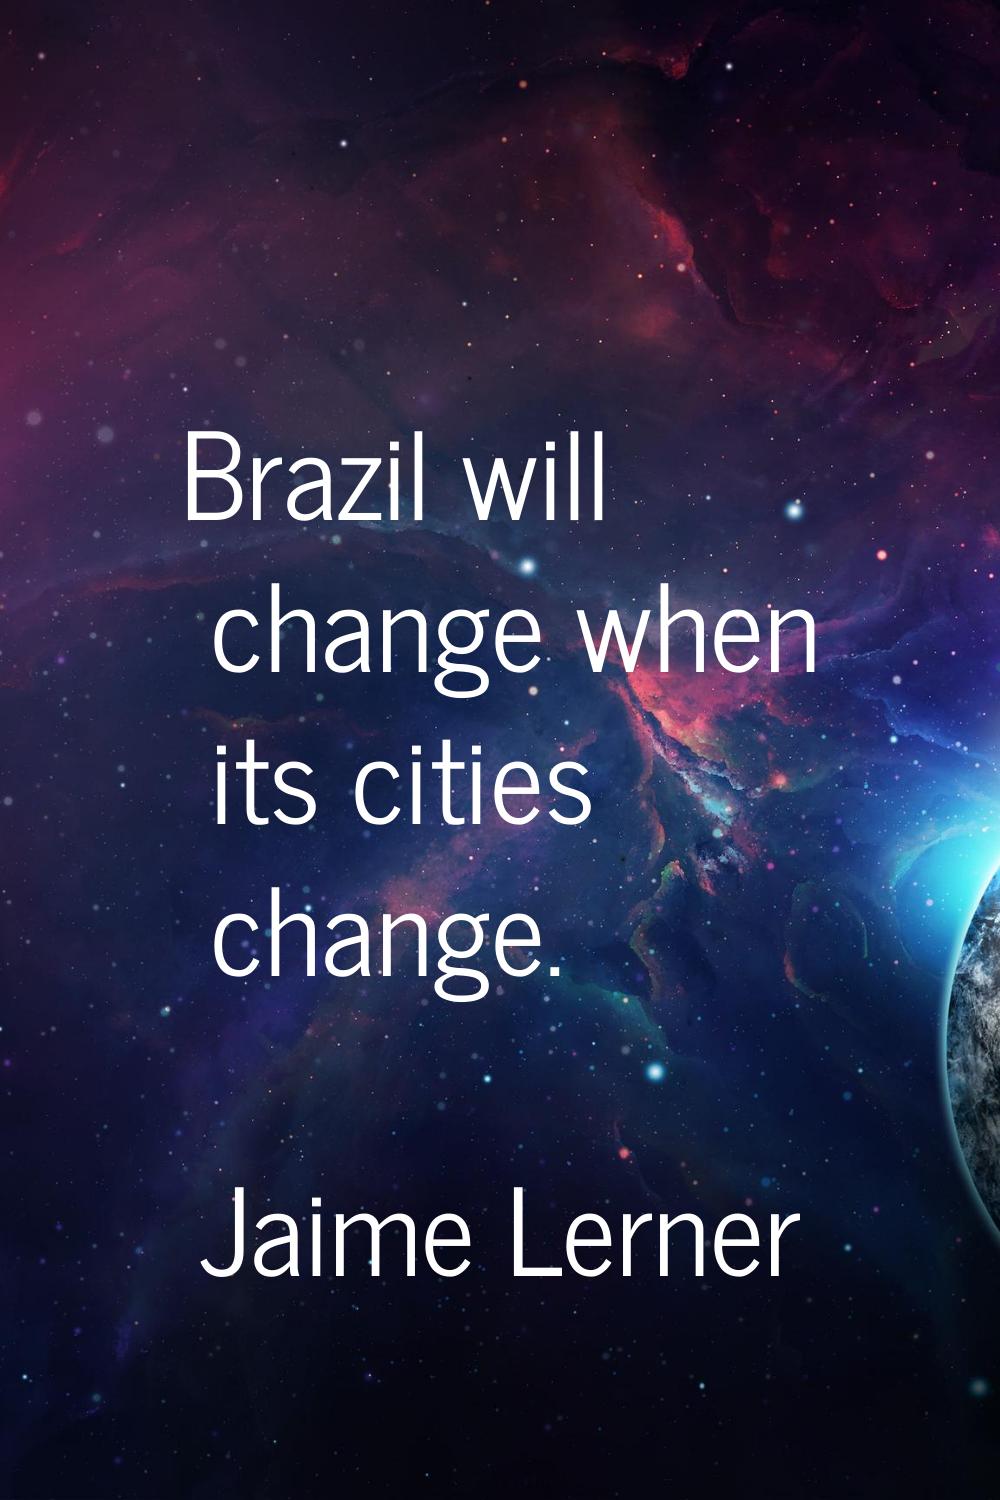 Brazil will change when its cities change.